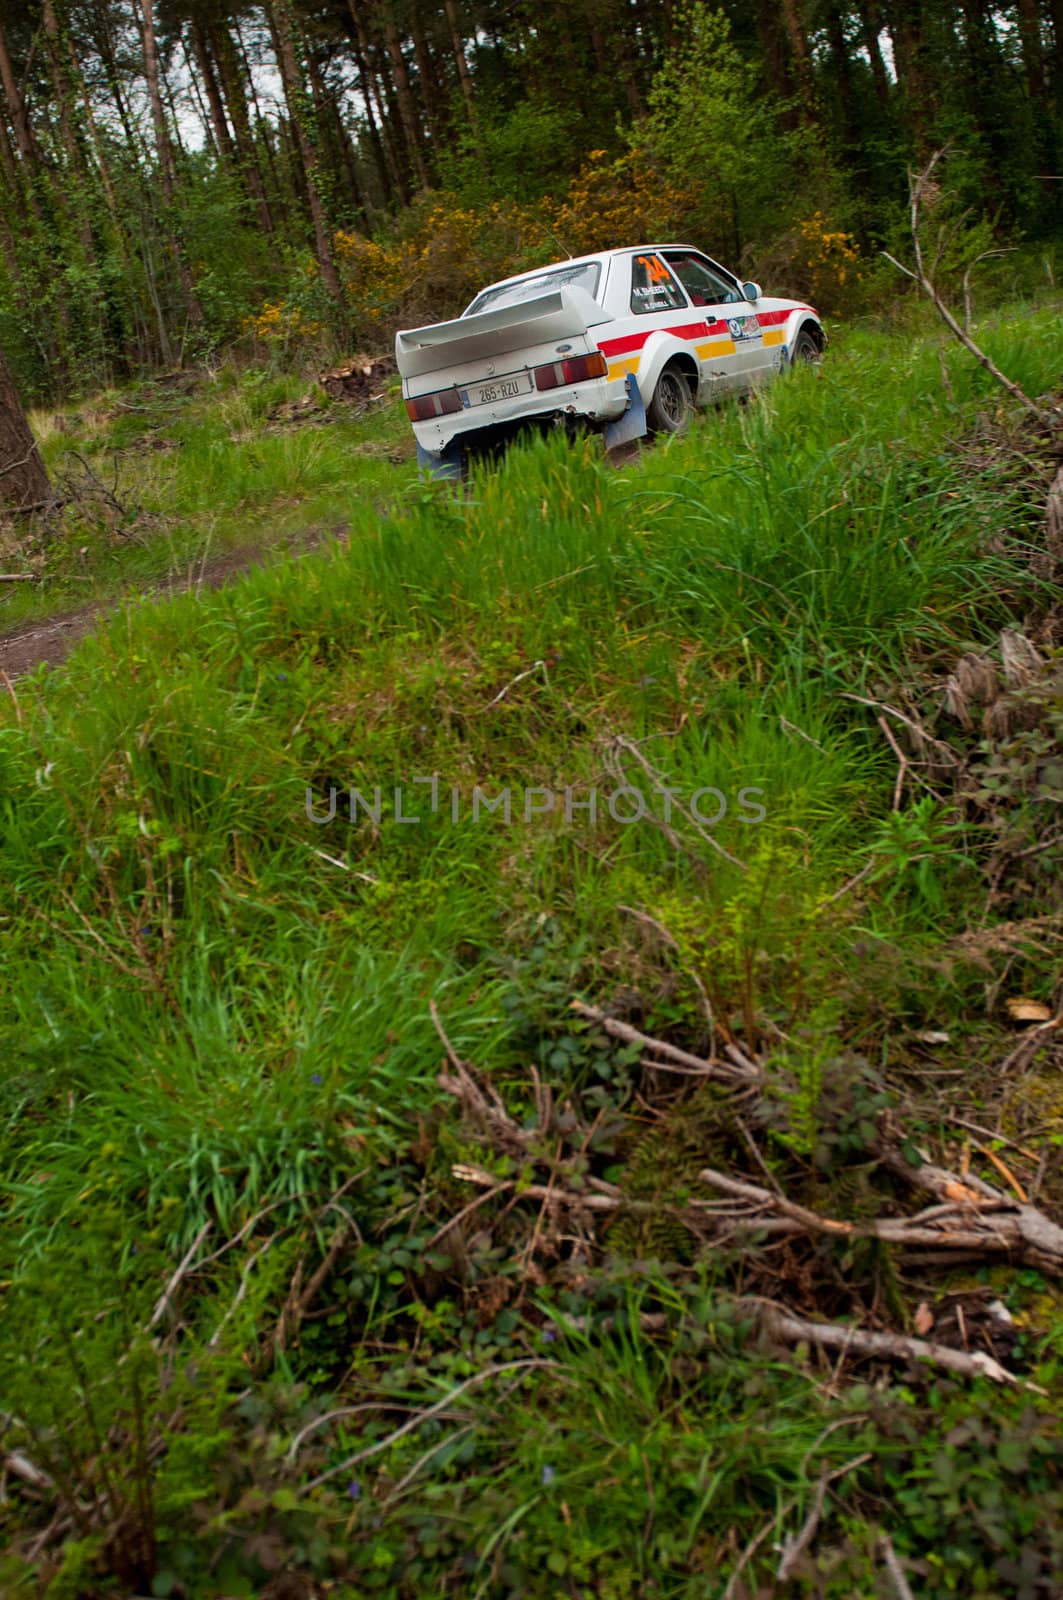 MALLOW, IRELAND - MAY 19: M. Sheedy driving Ford Escort at the Jim Walsh Cork Forest Rally on May 19, 2012 in Mallow, Ireland. 4th round of the Valvoline National Forest Rally Championship.